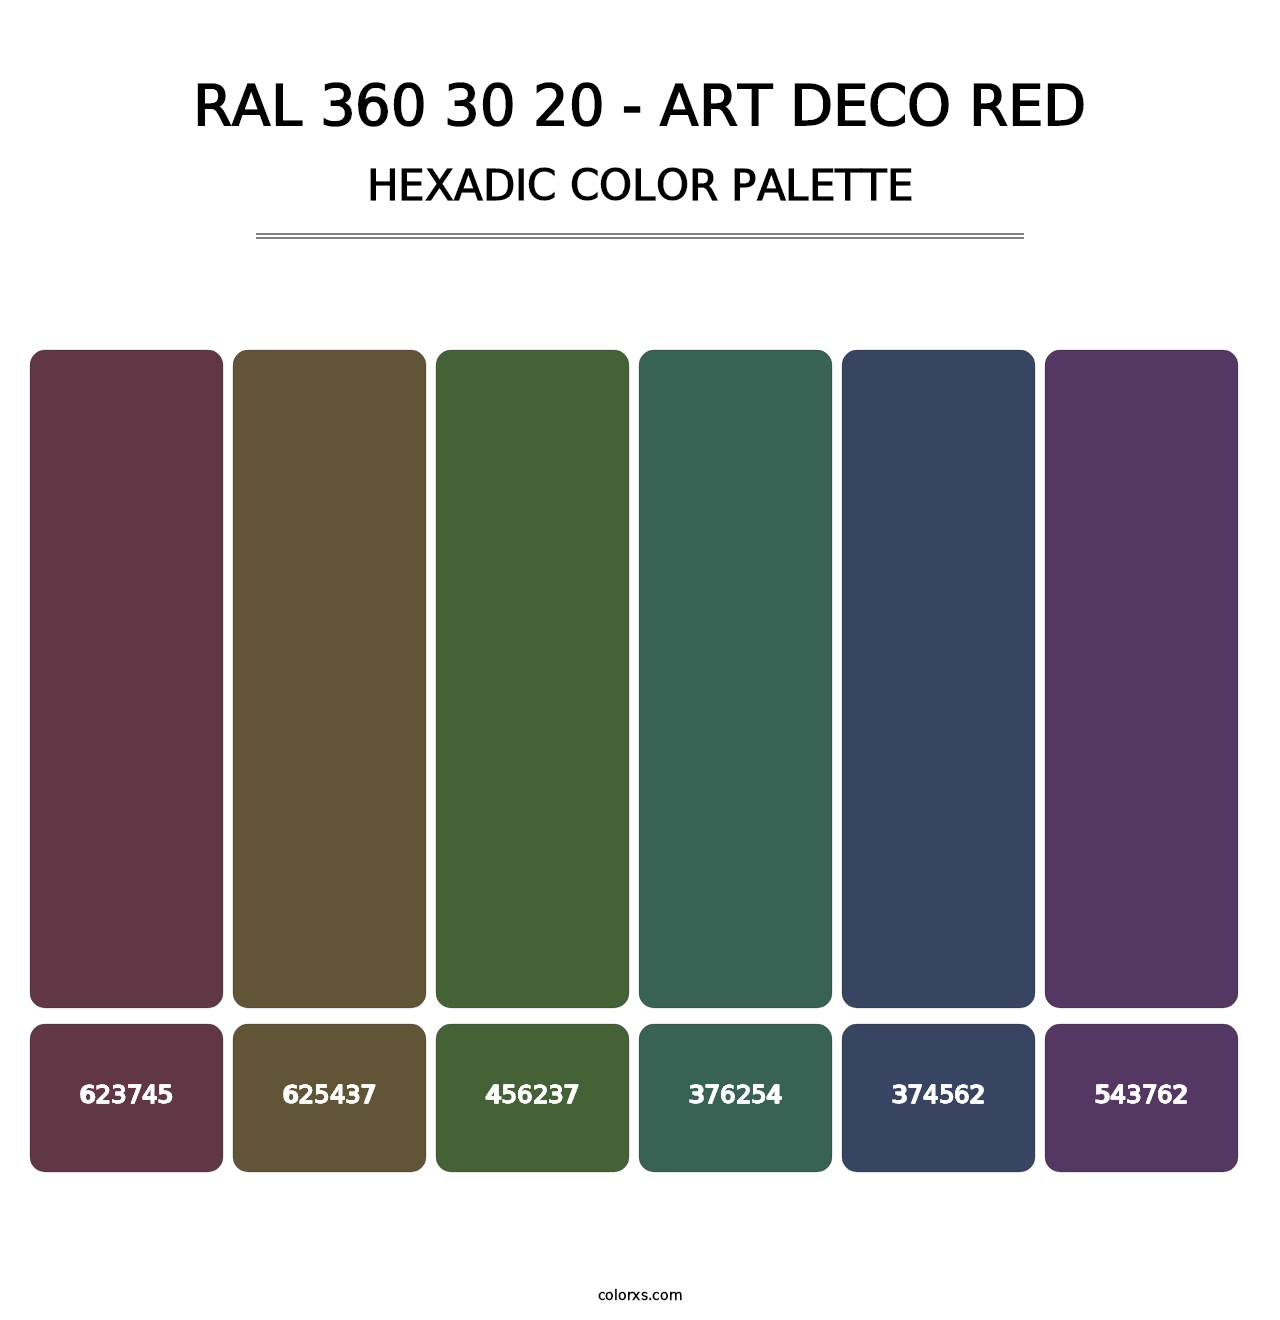 RAL 360 30 20 - Art Deco Red - Hexadic Color Palette